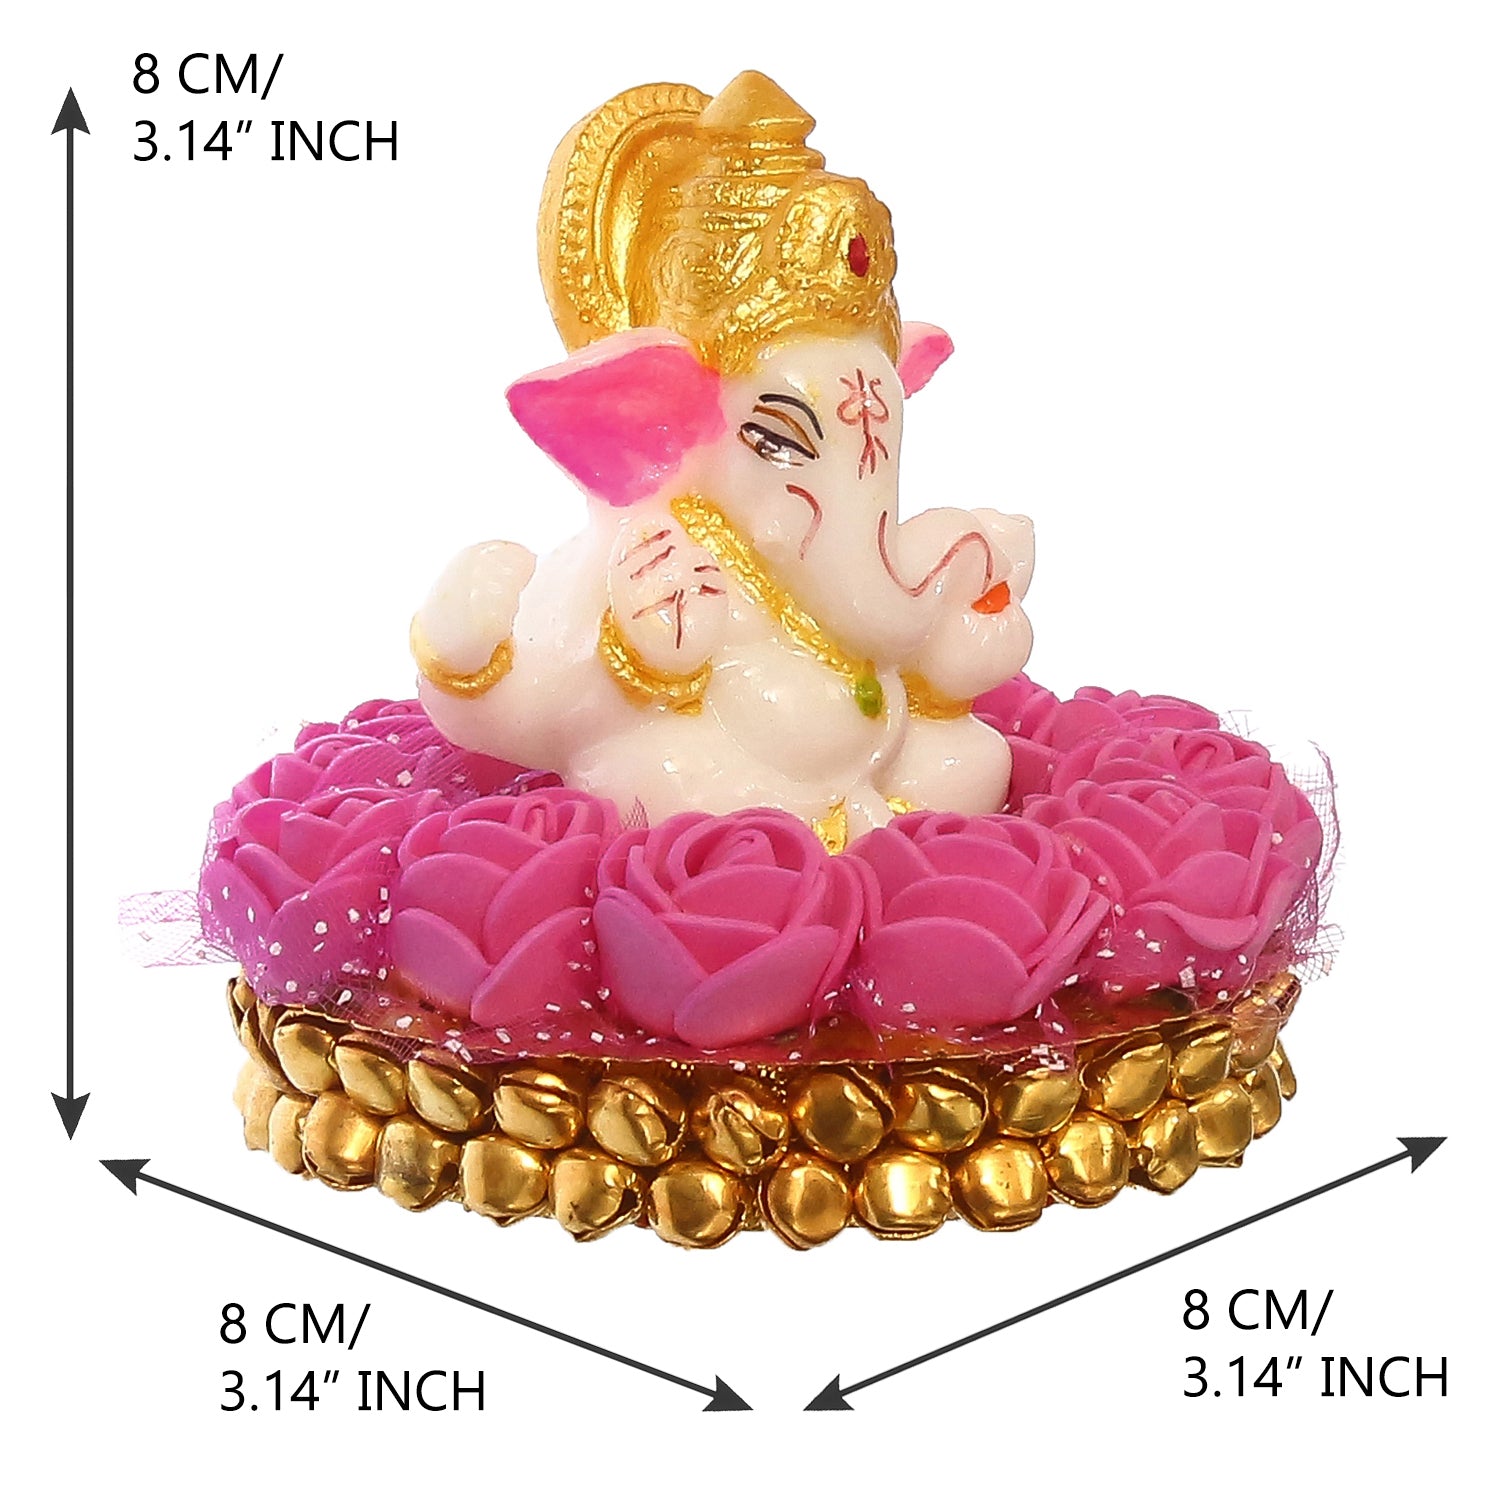 Polyresin Lord Ganesha Idol on Decorative Handcrafted Plate with Pink Flowers 3